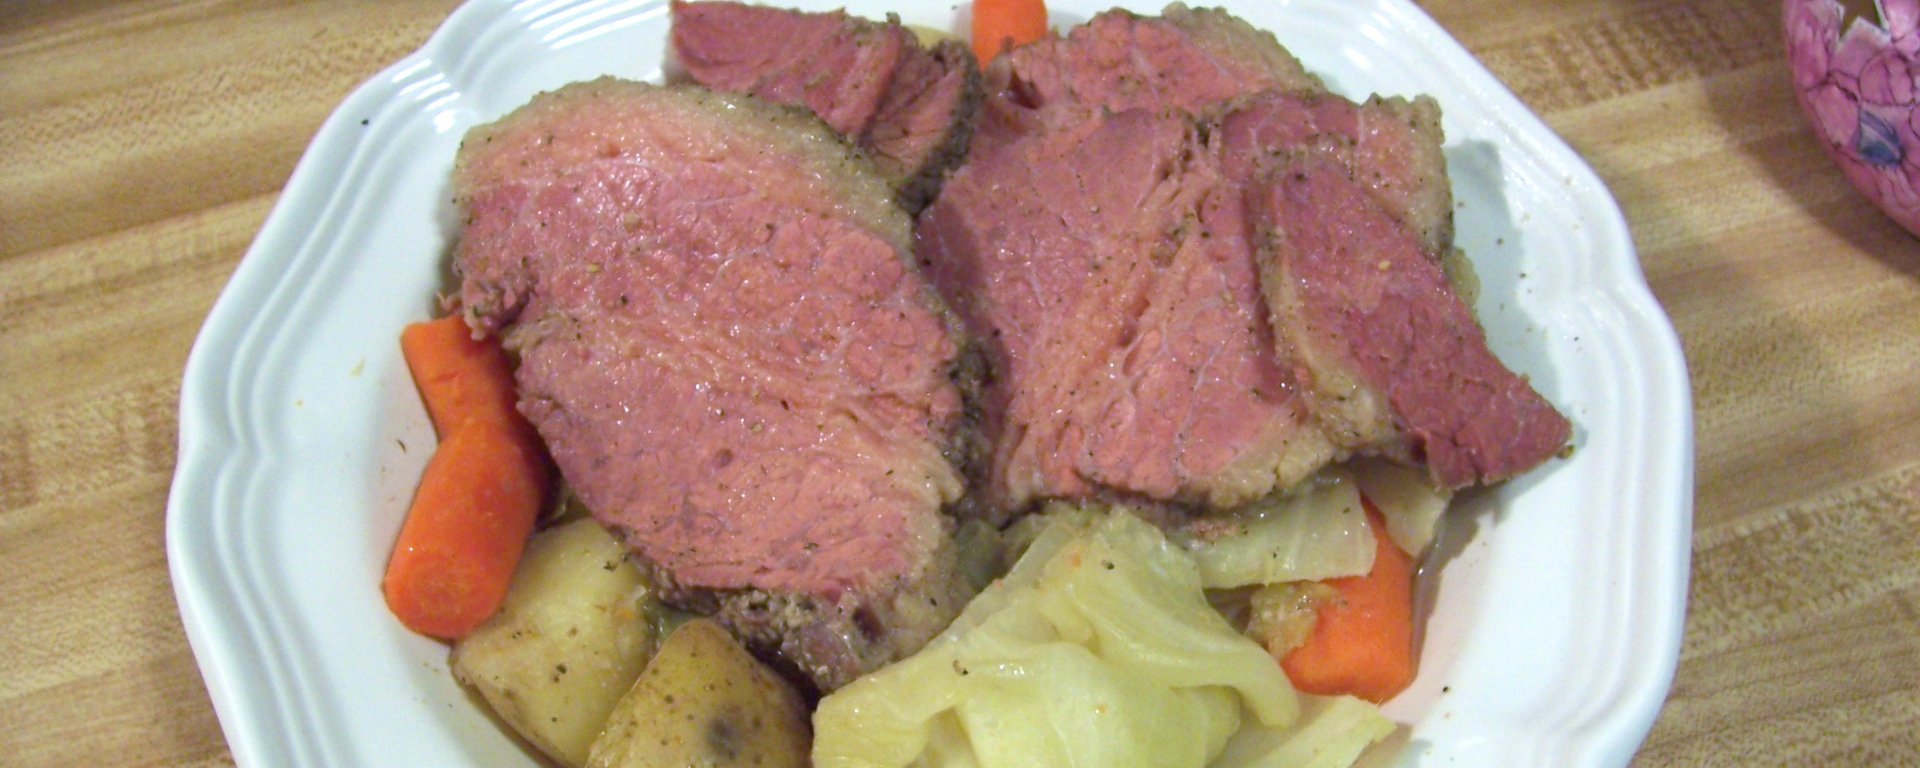 Corned Beef and Cabbage with Vegetables